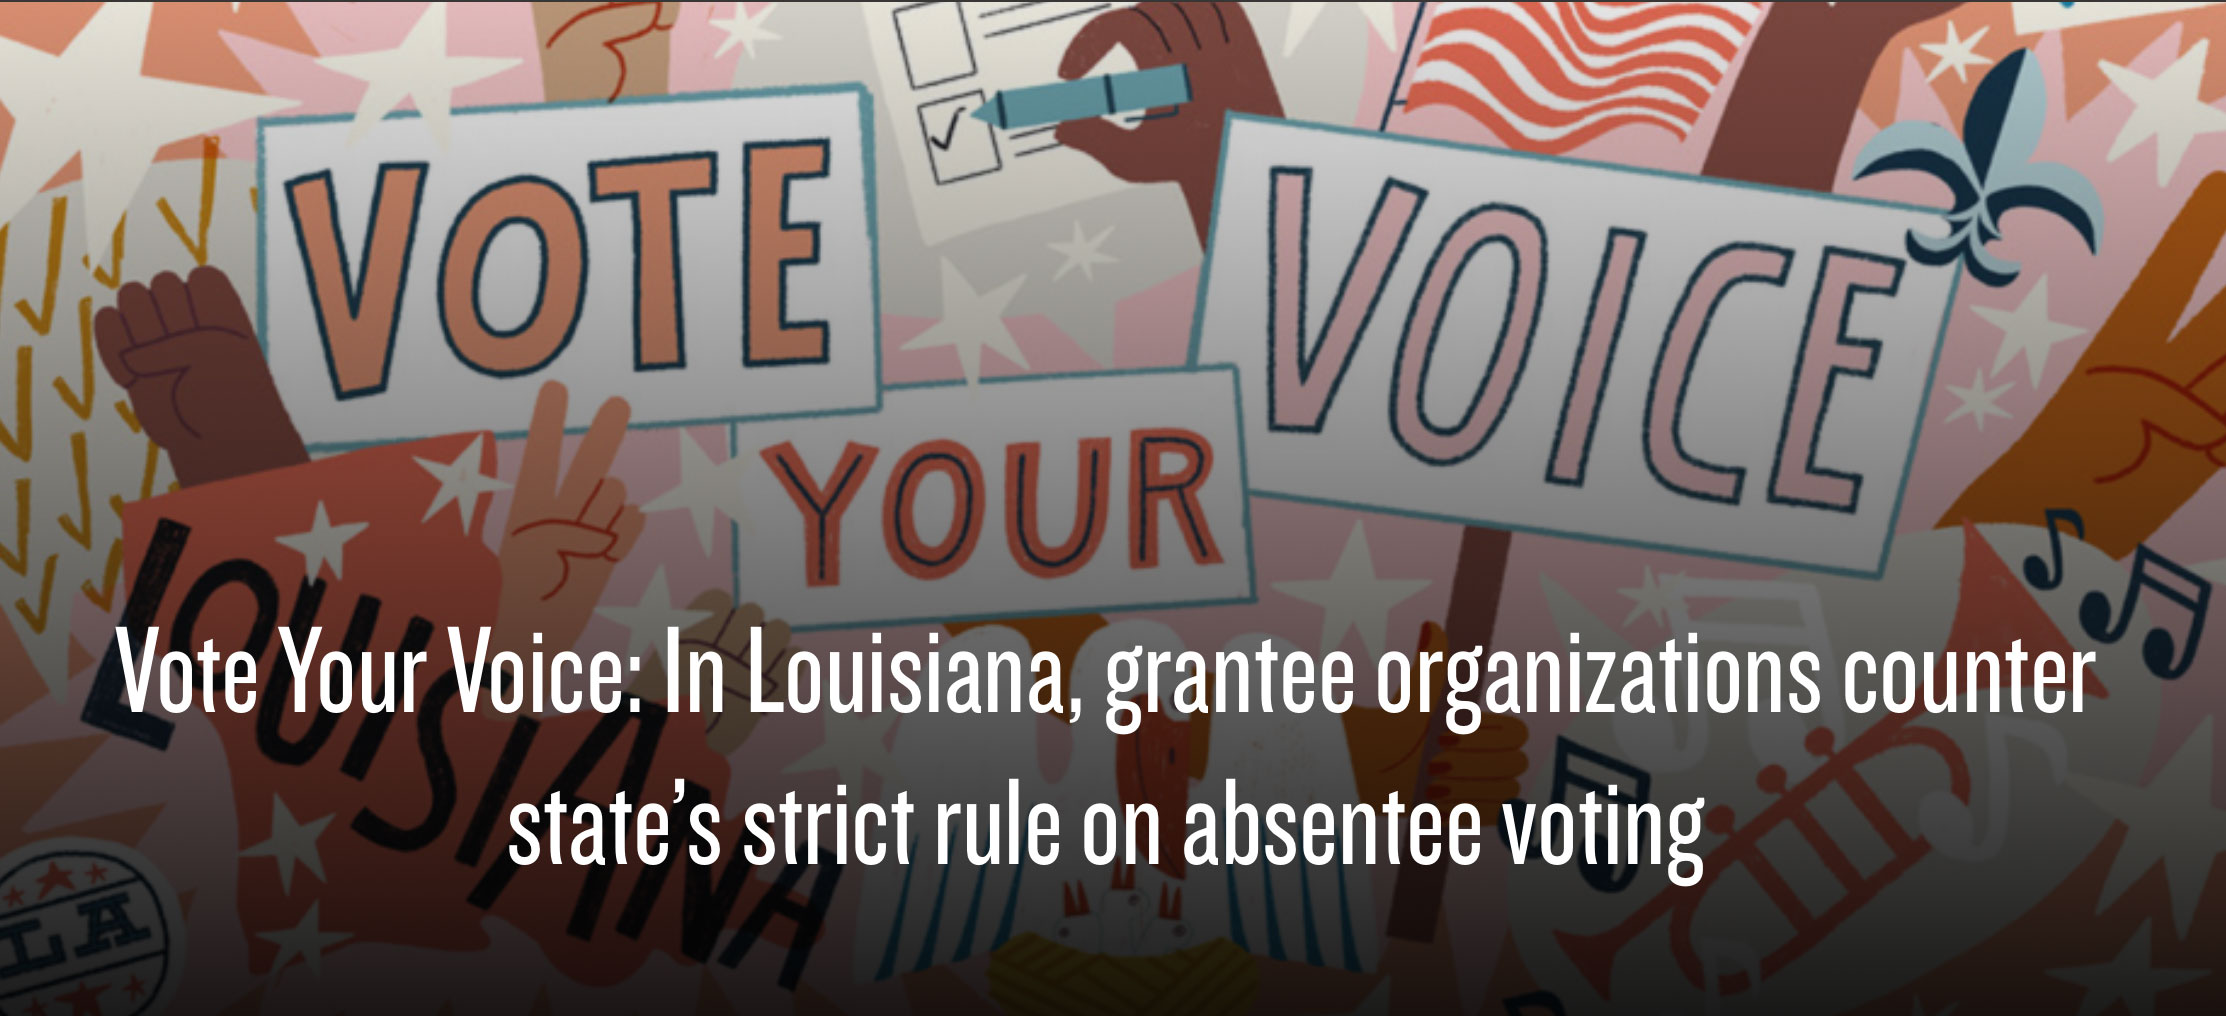 Vote Your Voice: In Louisiana, grantee organizations counter state’s strict rule on absentee voting